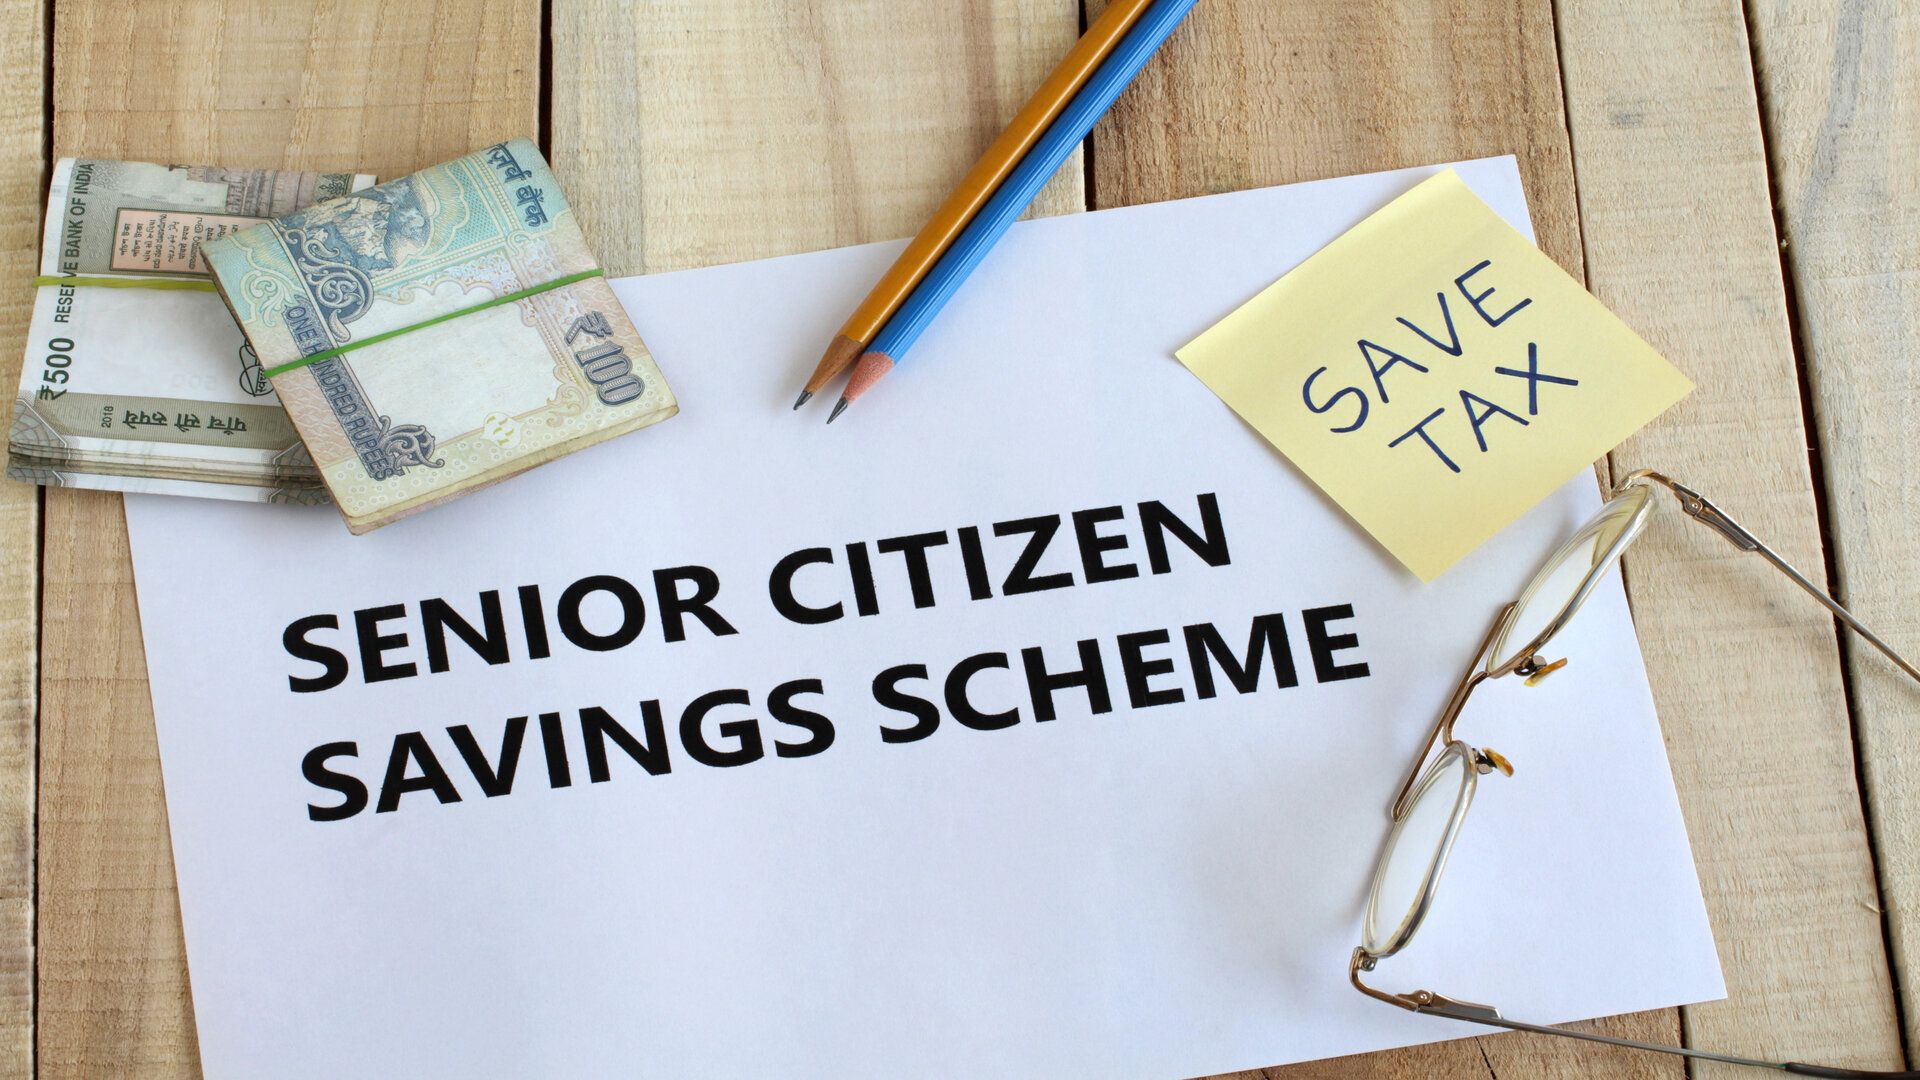 All You Need to Know About Senior Citizens Savings Scheme